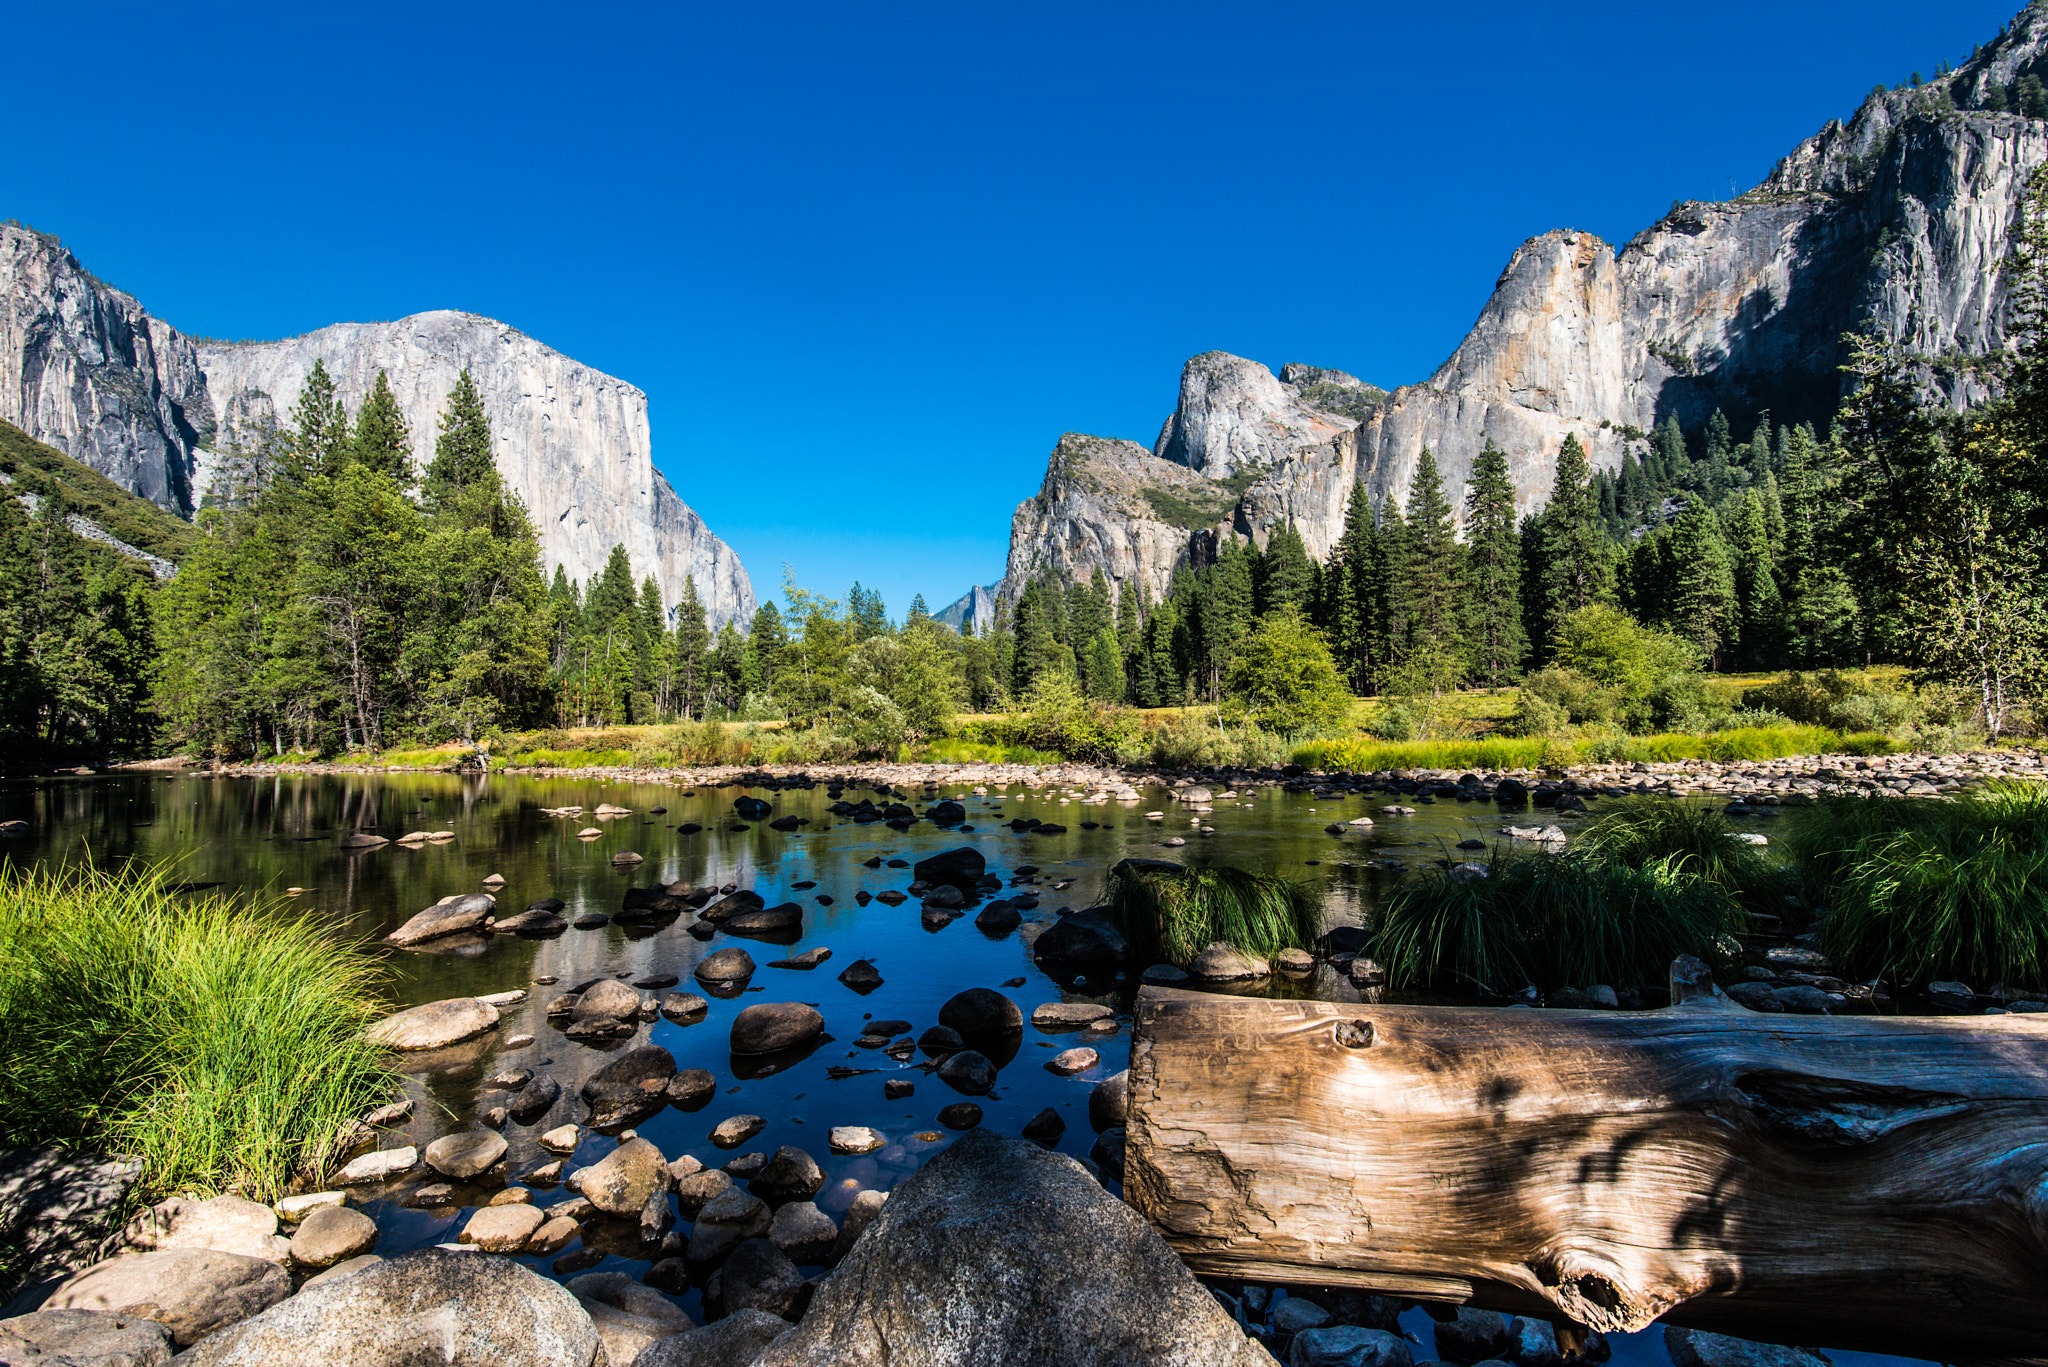 Summer In Yosemite National Park In California's Sierra Nevada Mountains  United States Of America 4k Ultra Hd Wallpapers For Desktop 3840x2400 :  